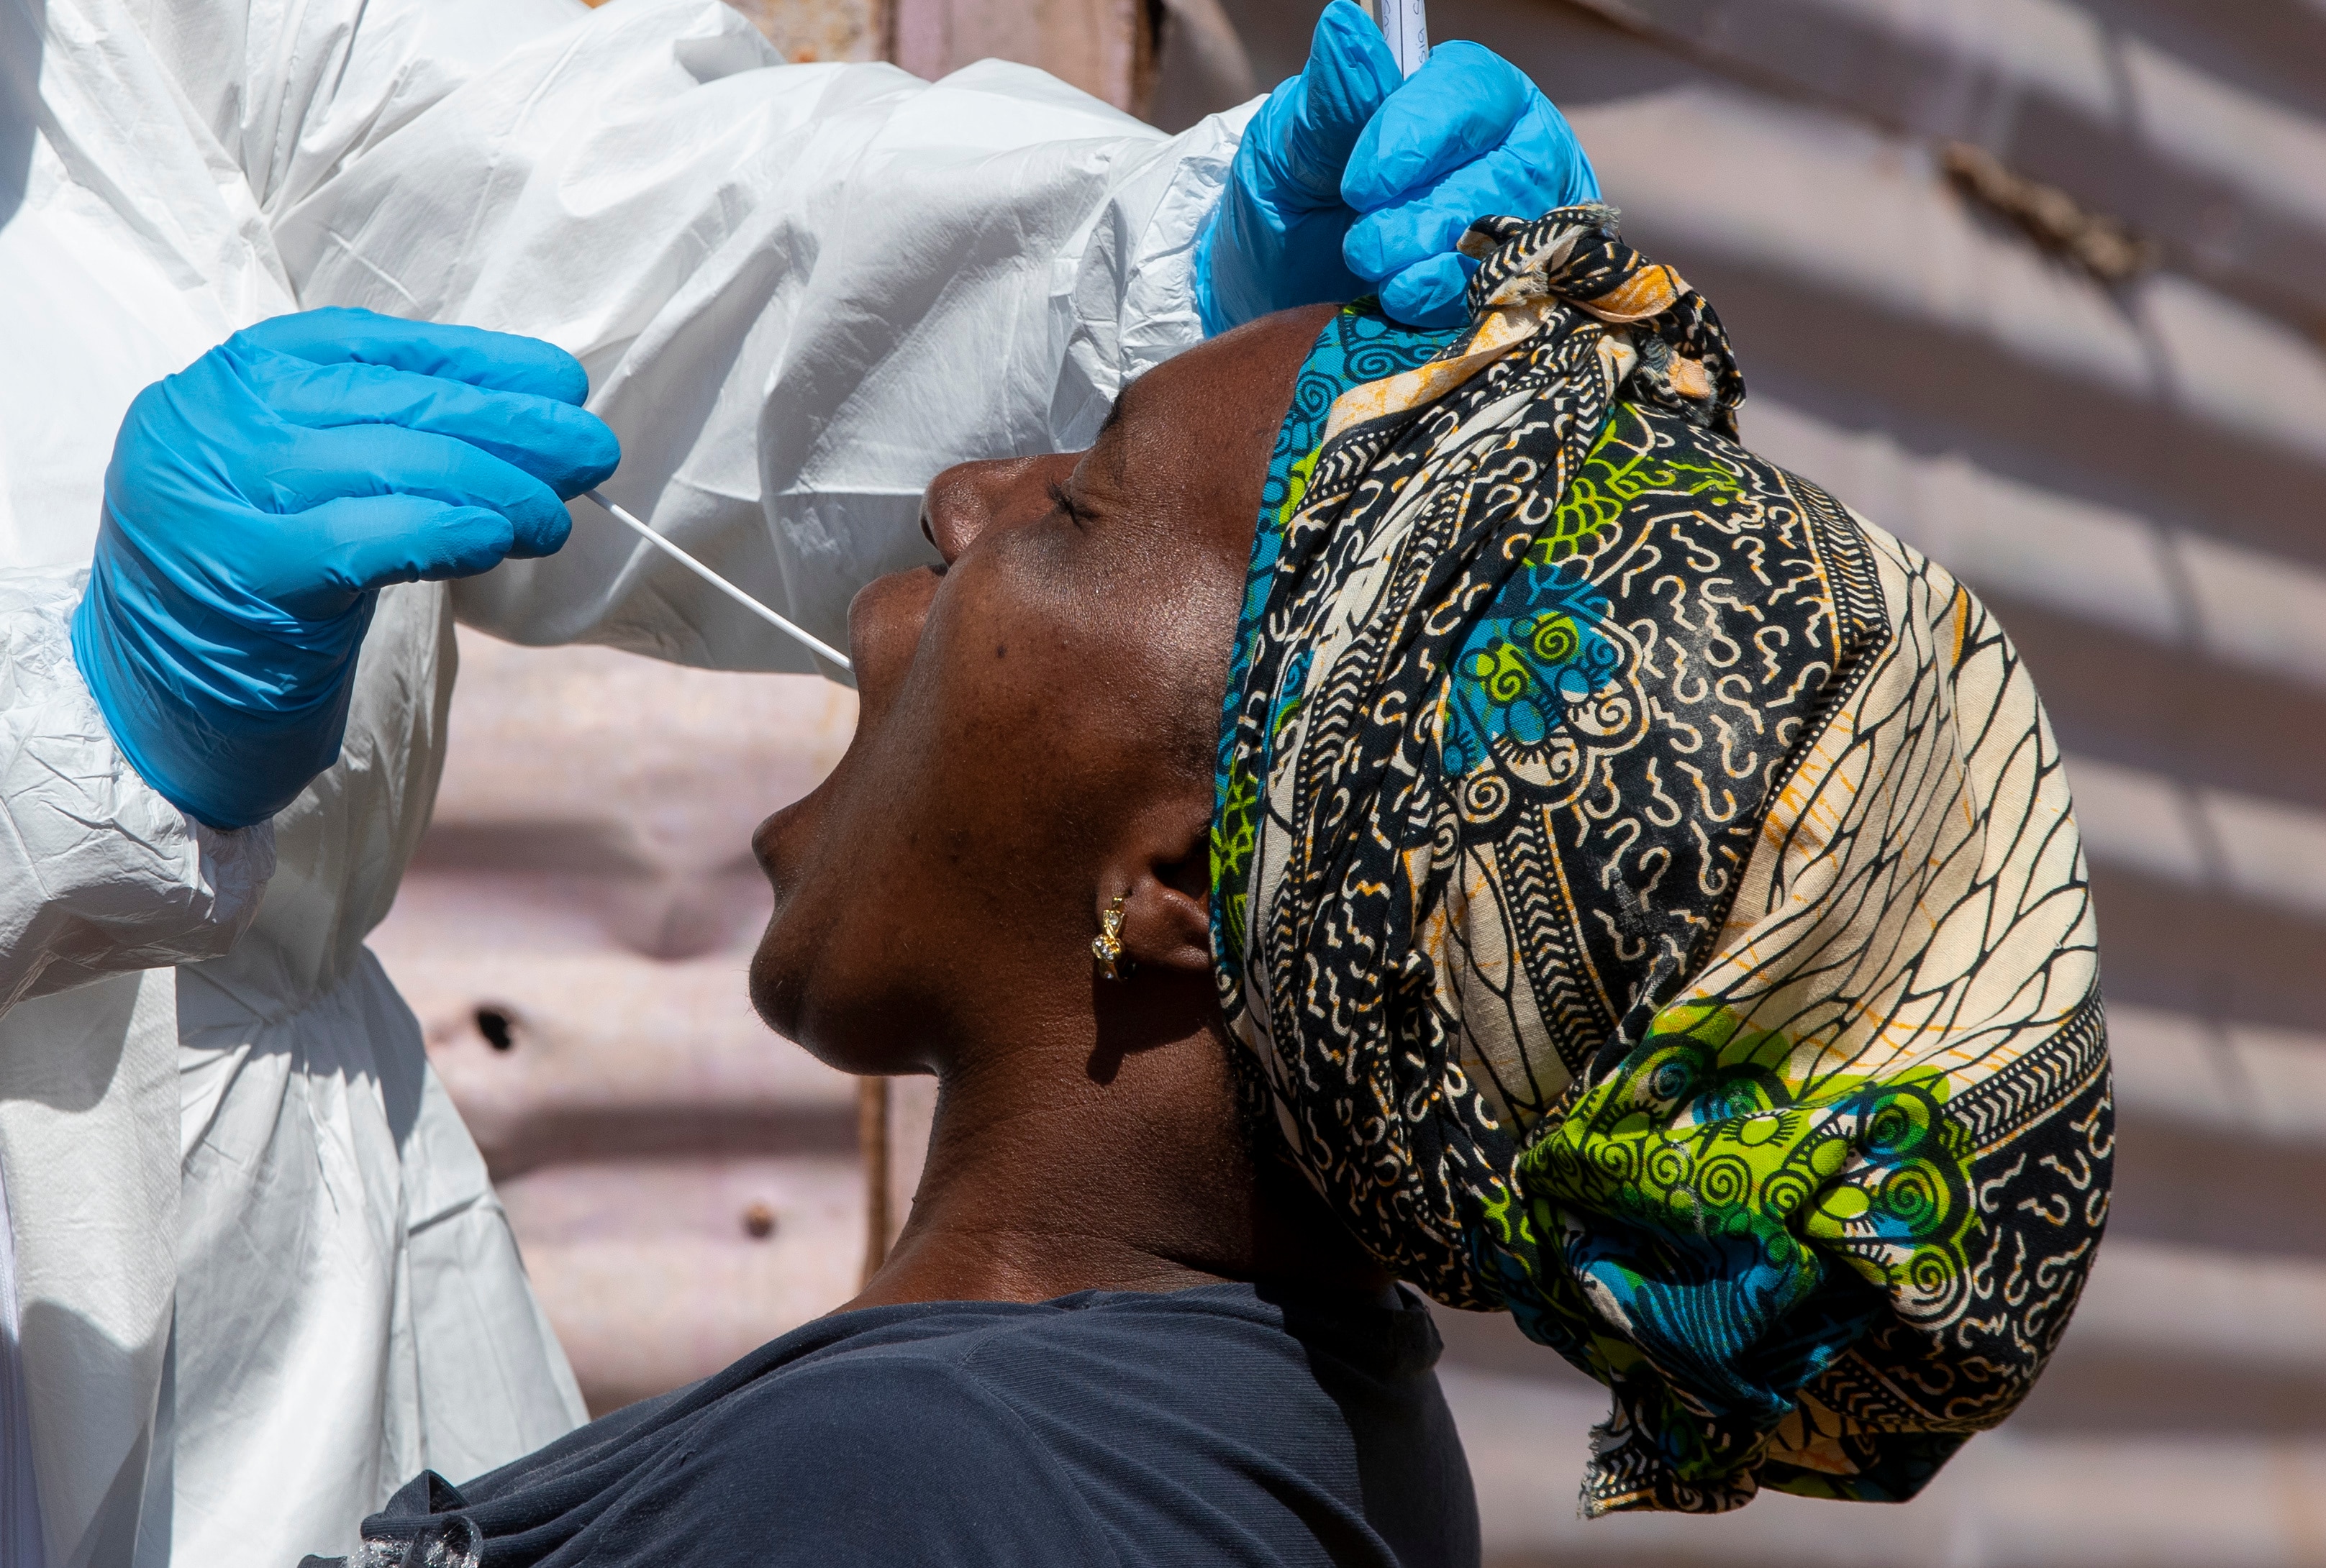 A woman opens her mouth for a heath worker to collect a sample for coronavirus testing in South Africa.